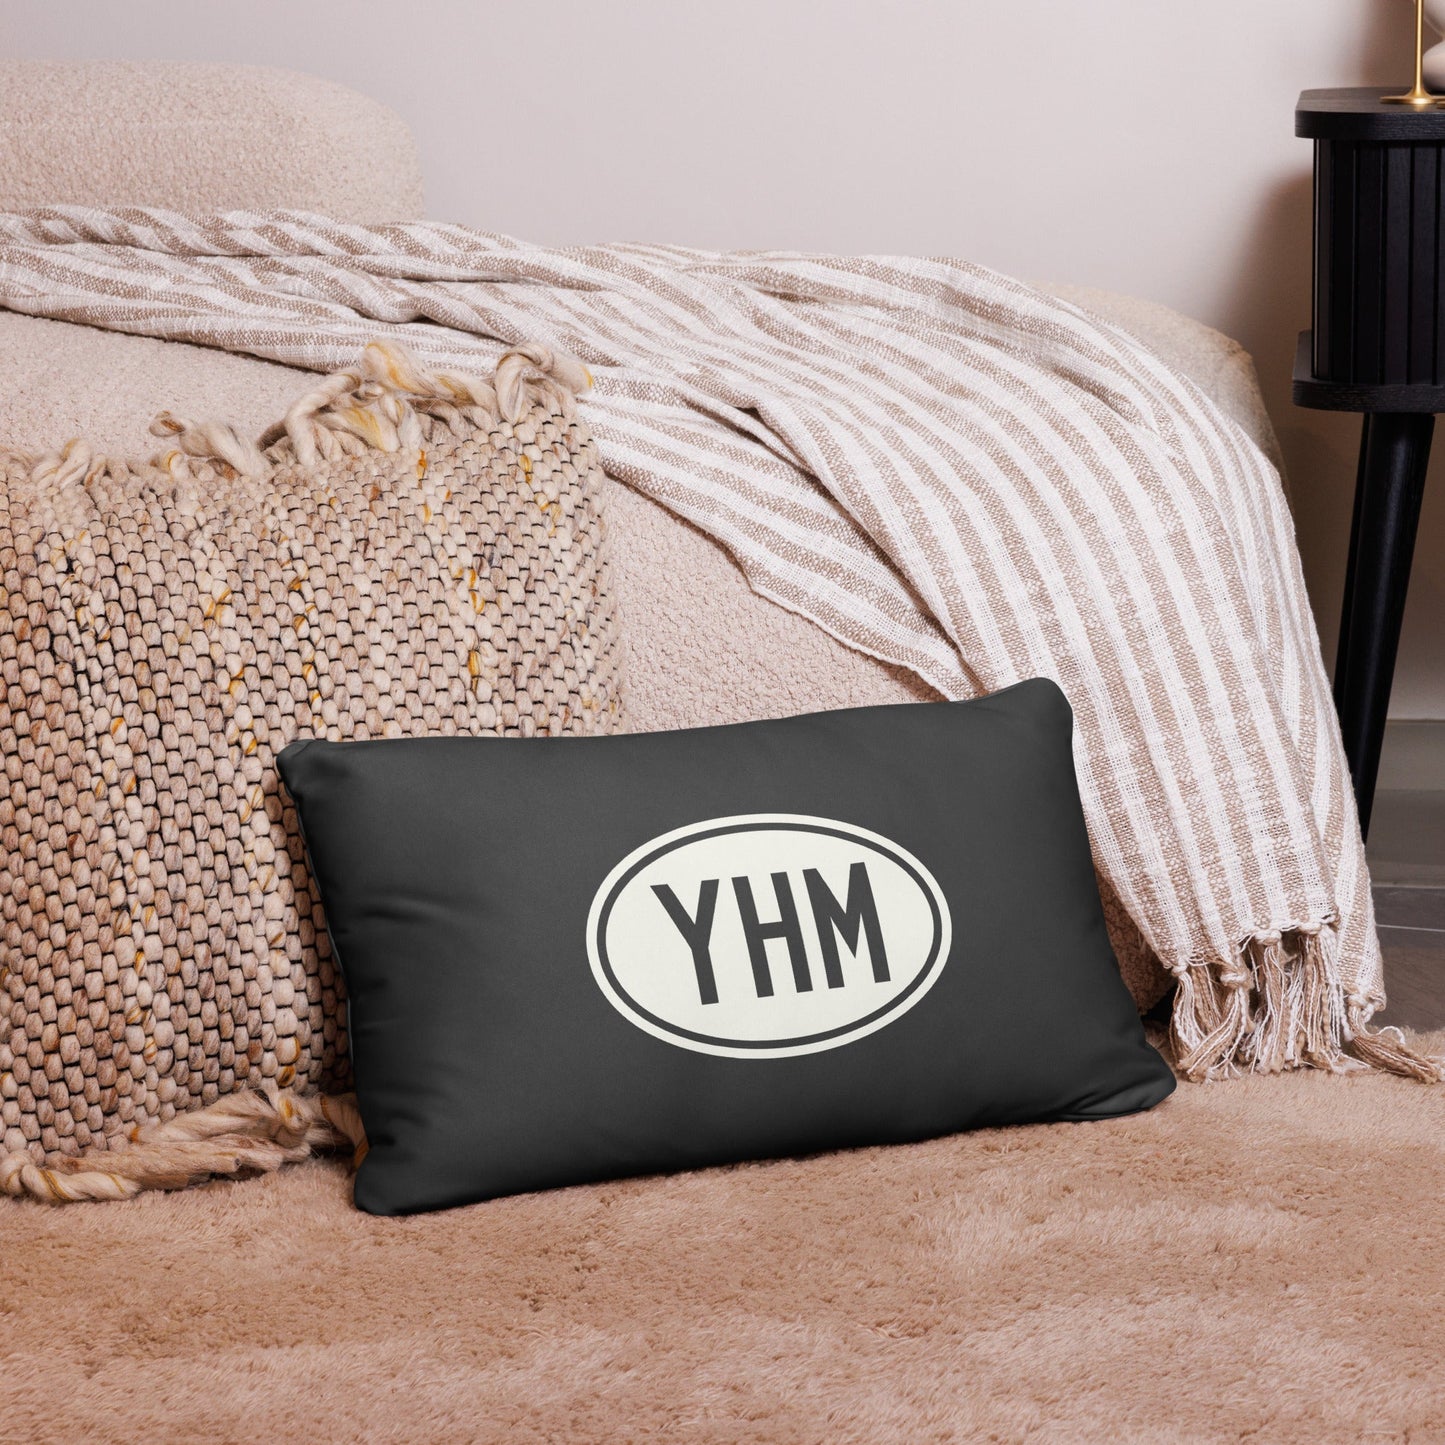 Unique Travel Gift Throw Pillow - White Oval • YUL Montreal • YHM Designs - Image 05